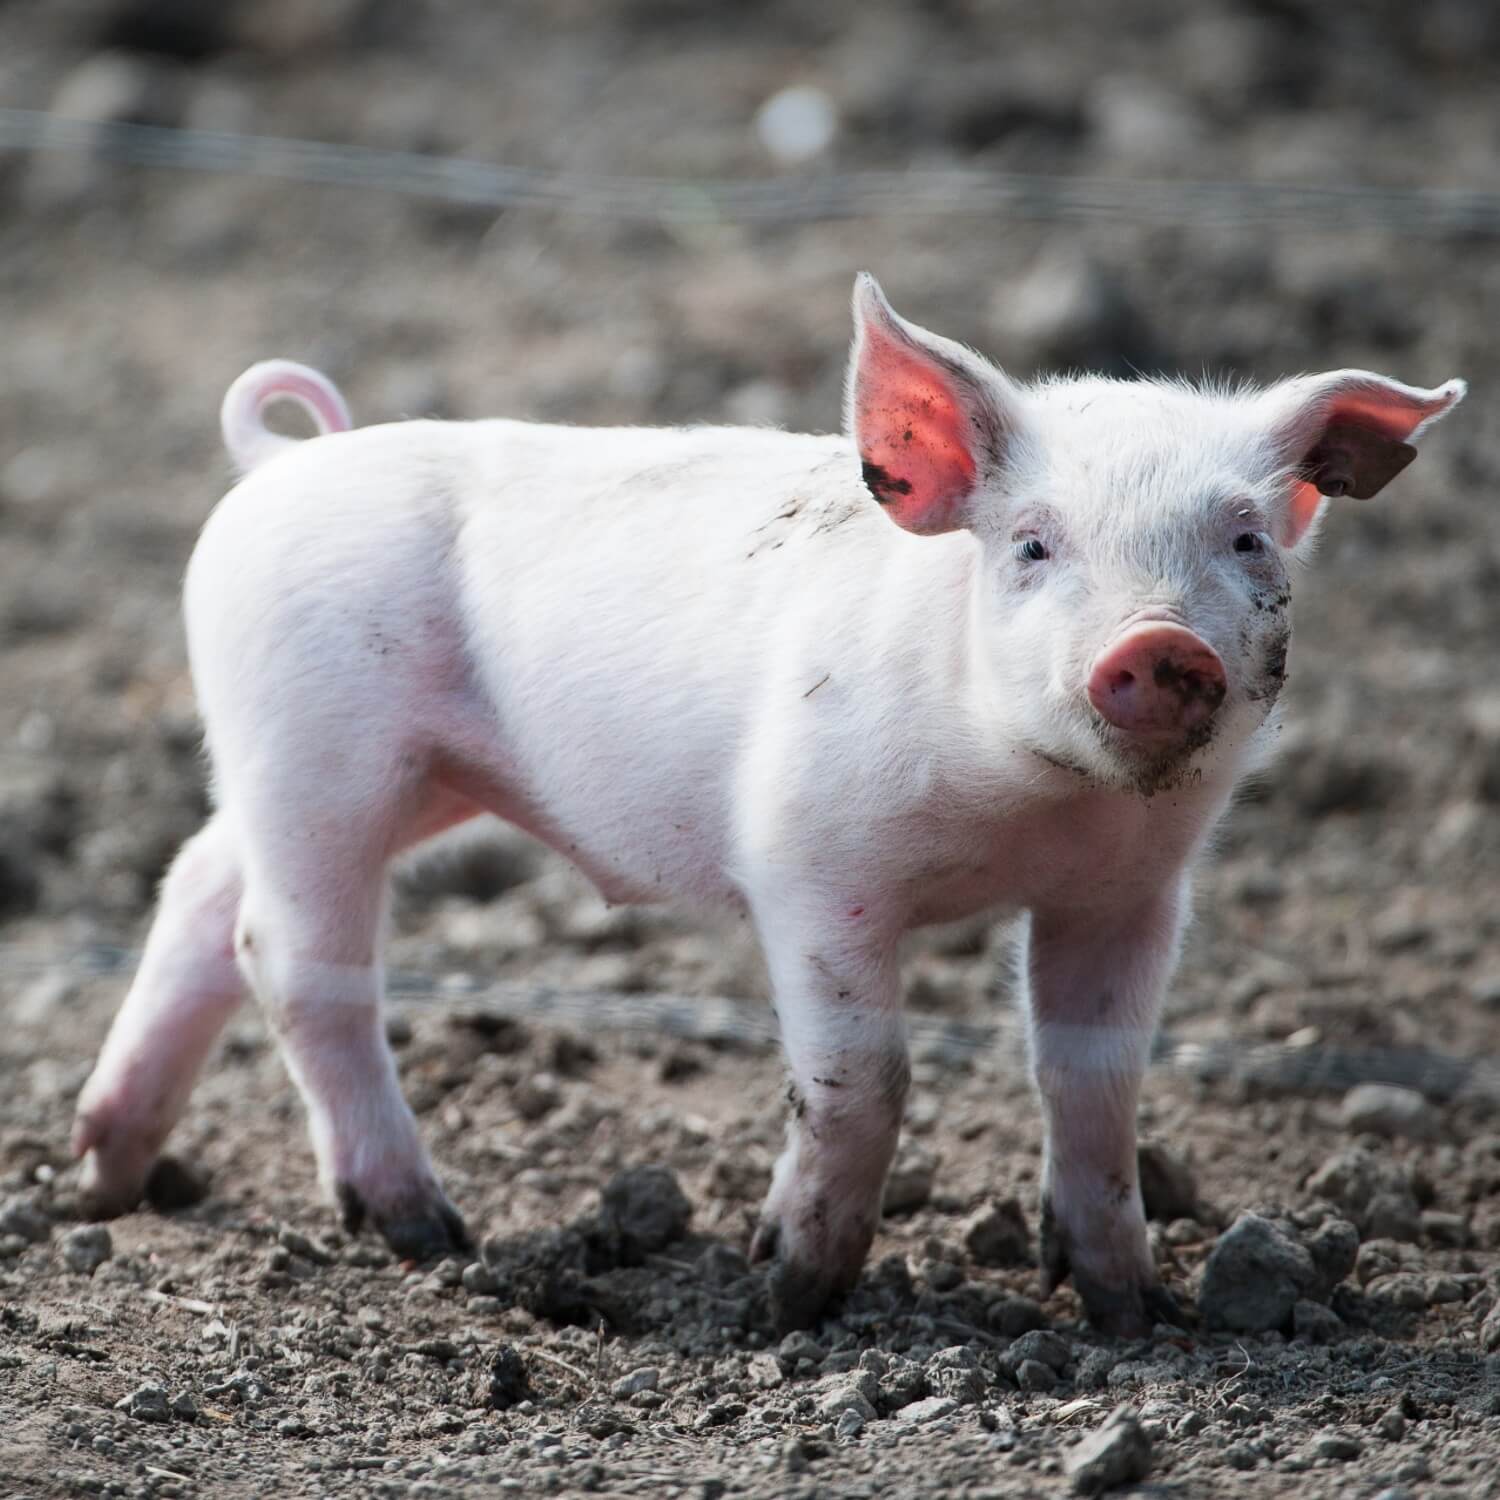 A young pig on a factory farm